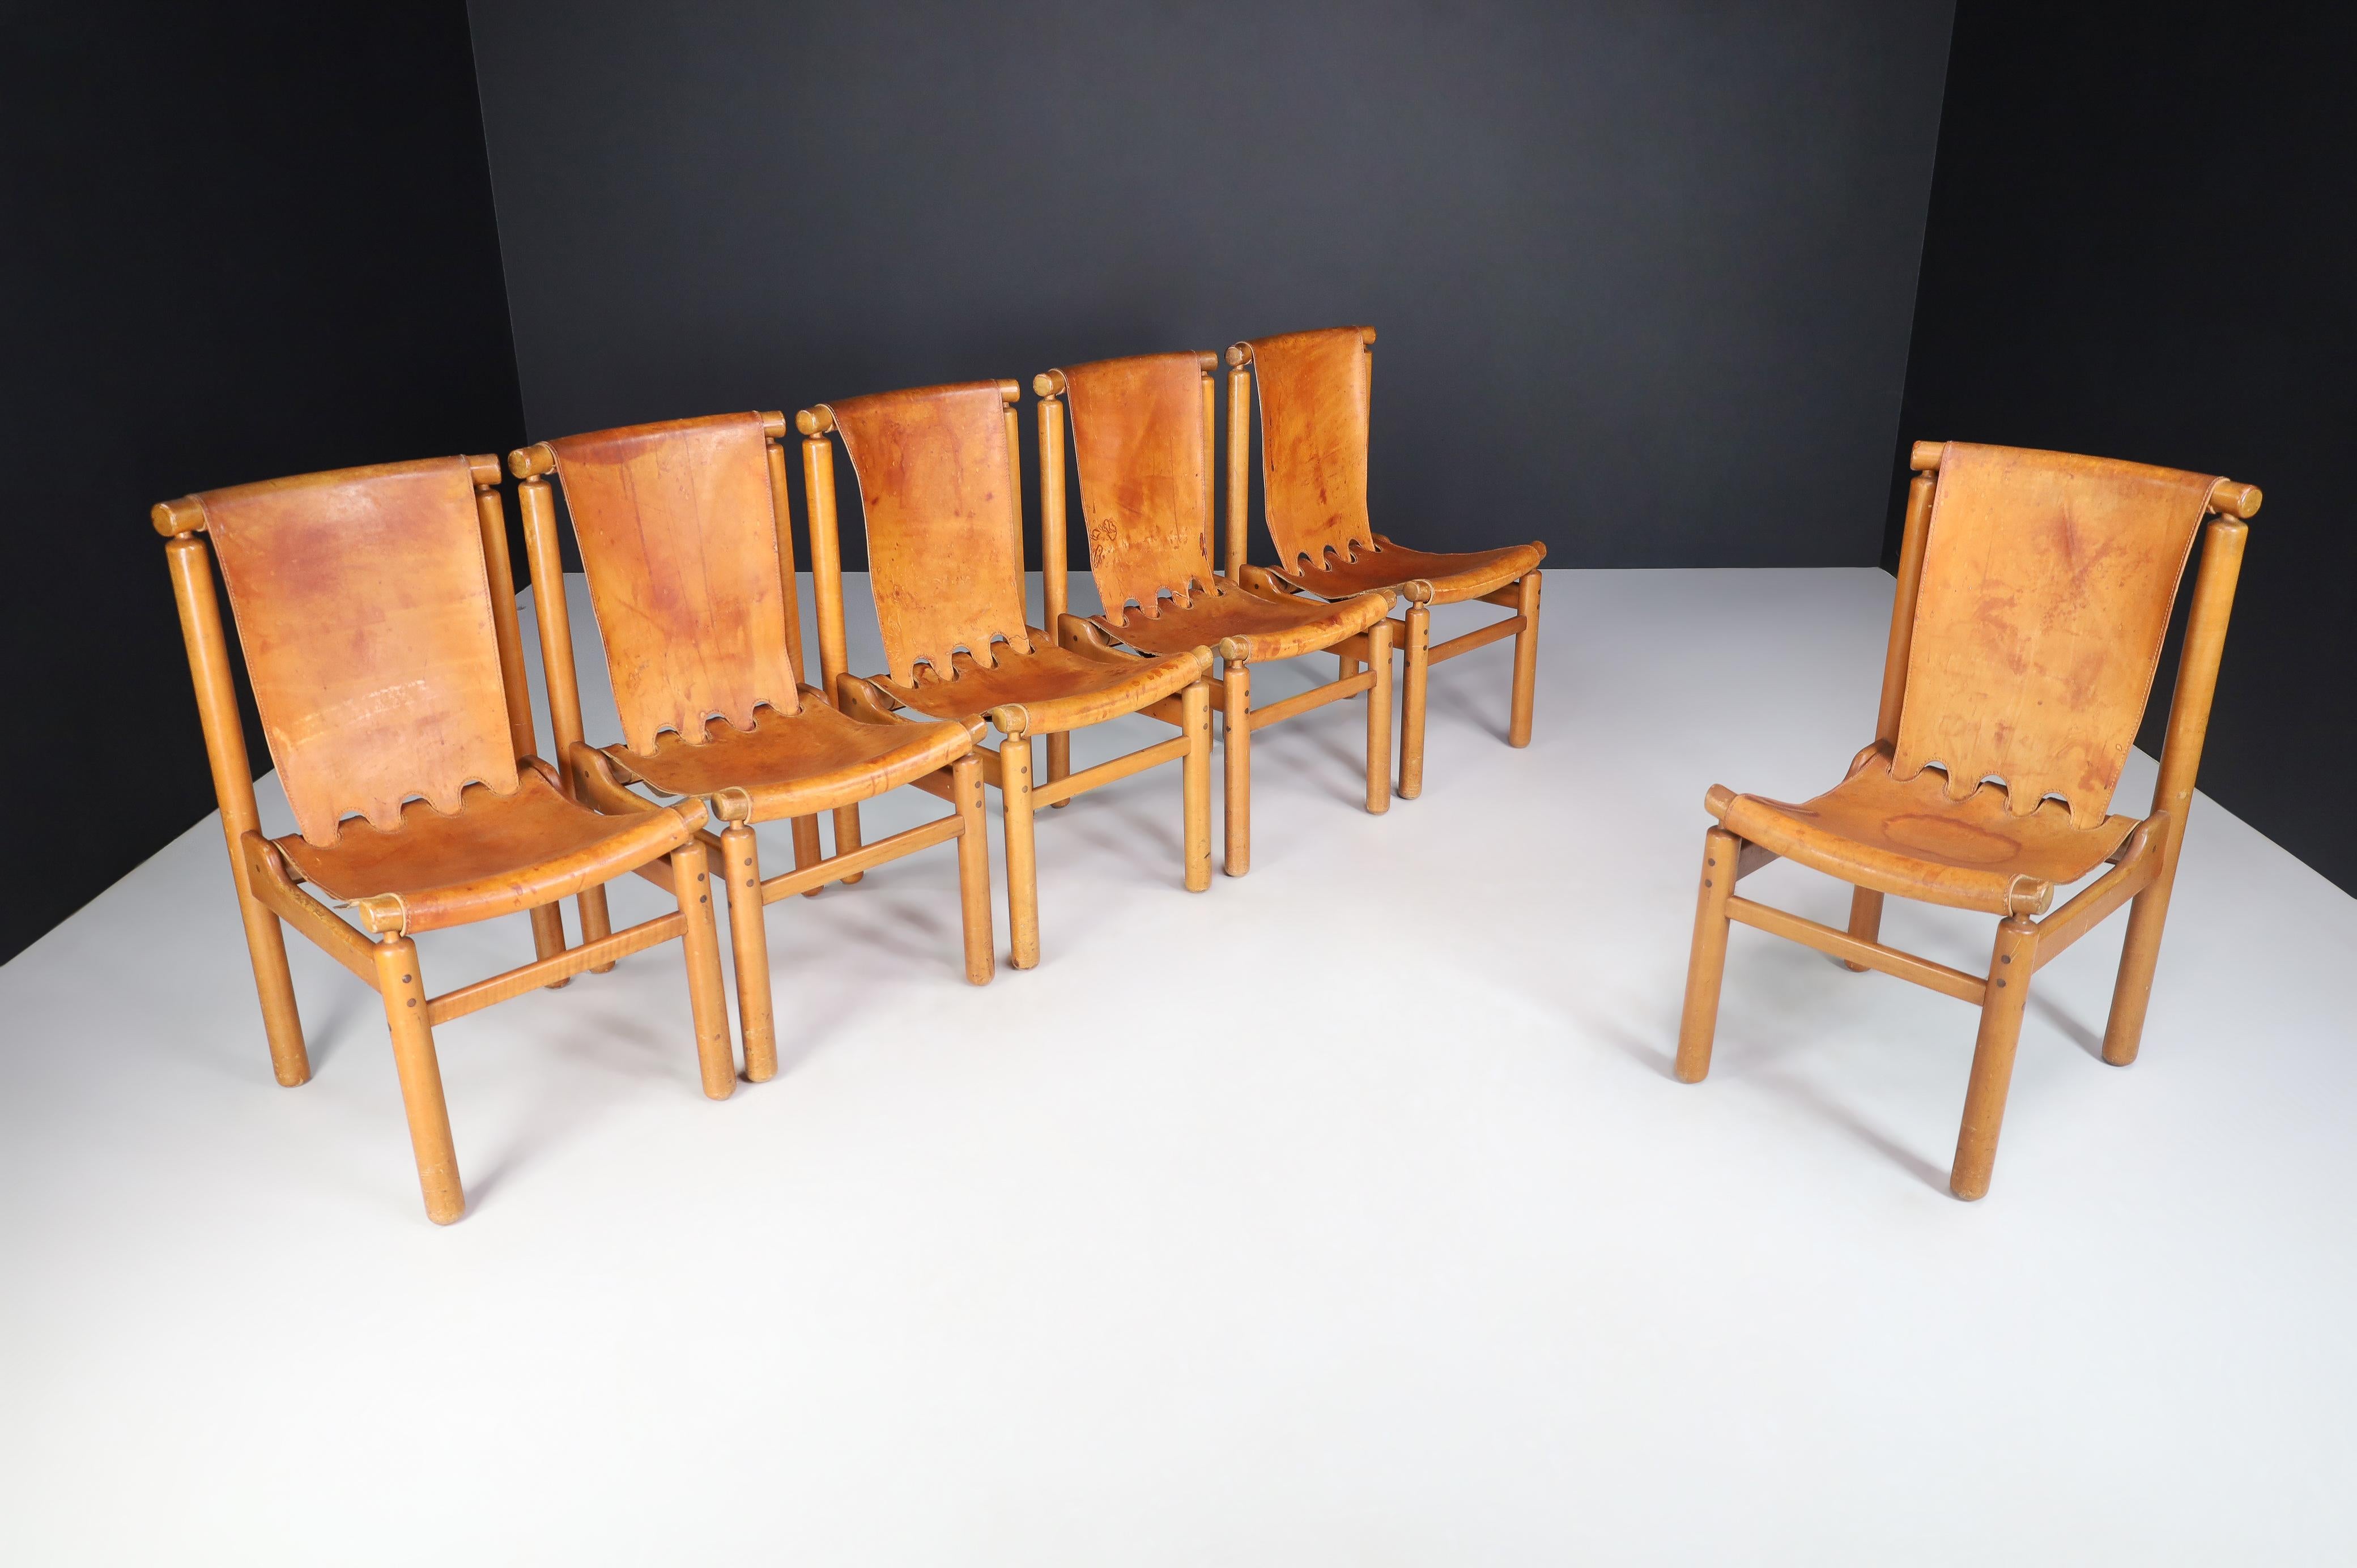 Ilmari Tapiovaara set of six dining chairs in cognac leather, Finland, the 1950s

Ilmari Tapiovaara's eccentric set of six chairs for Permanente Mobili Cantù, the 1950s. The setting is made with a monumental wooden frame. The structure has